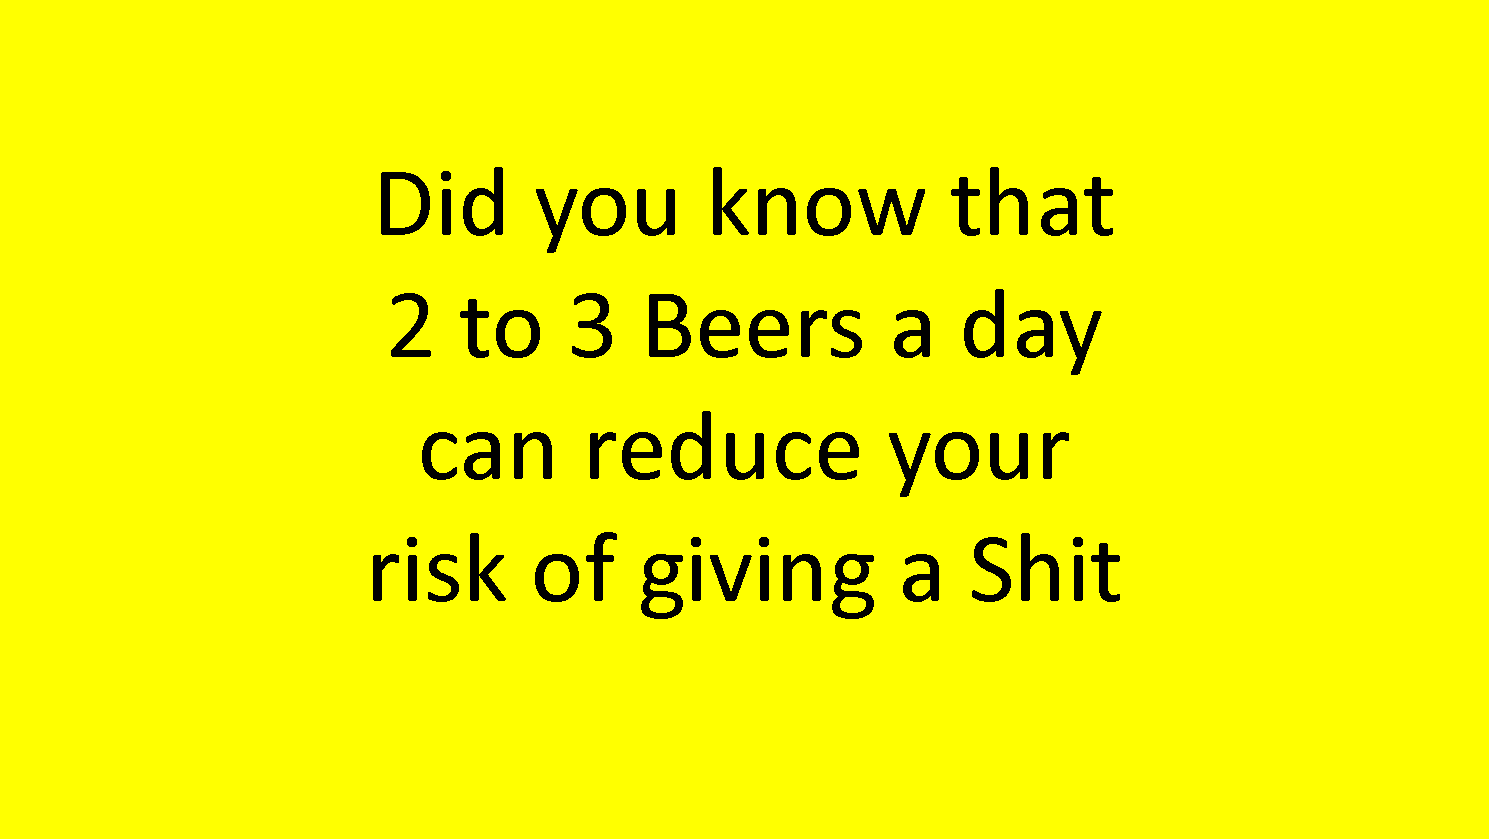 2 to 3 Beers